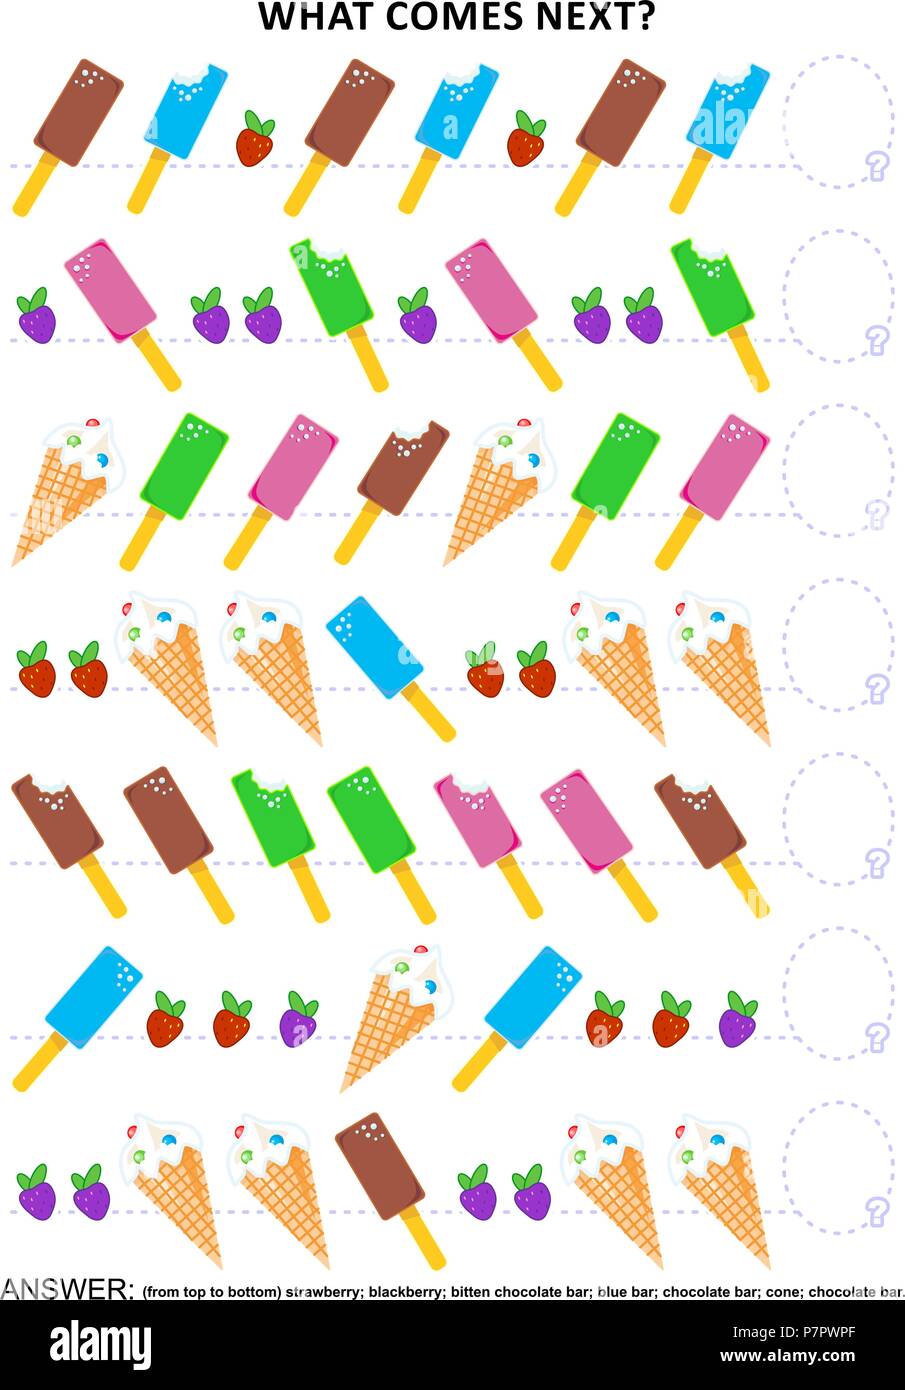 Ice-cream themed educational logic game training sequential pattern recognition: What comes next in the sequence? Answer included. Stock Vector